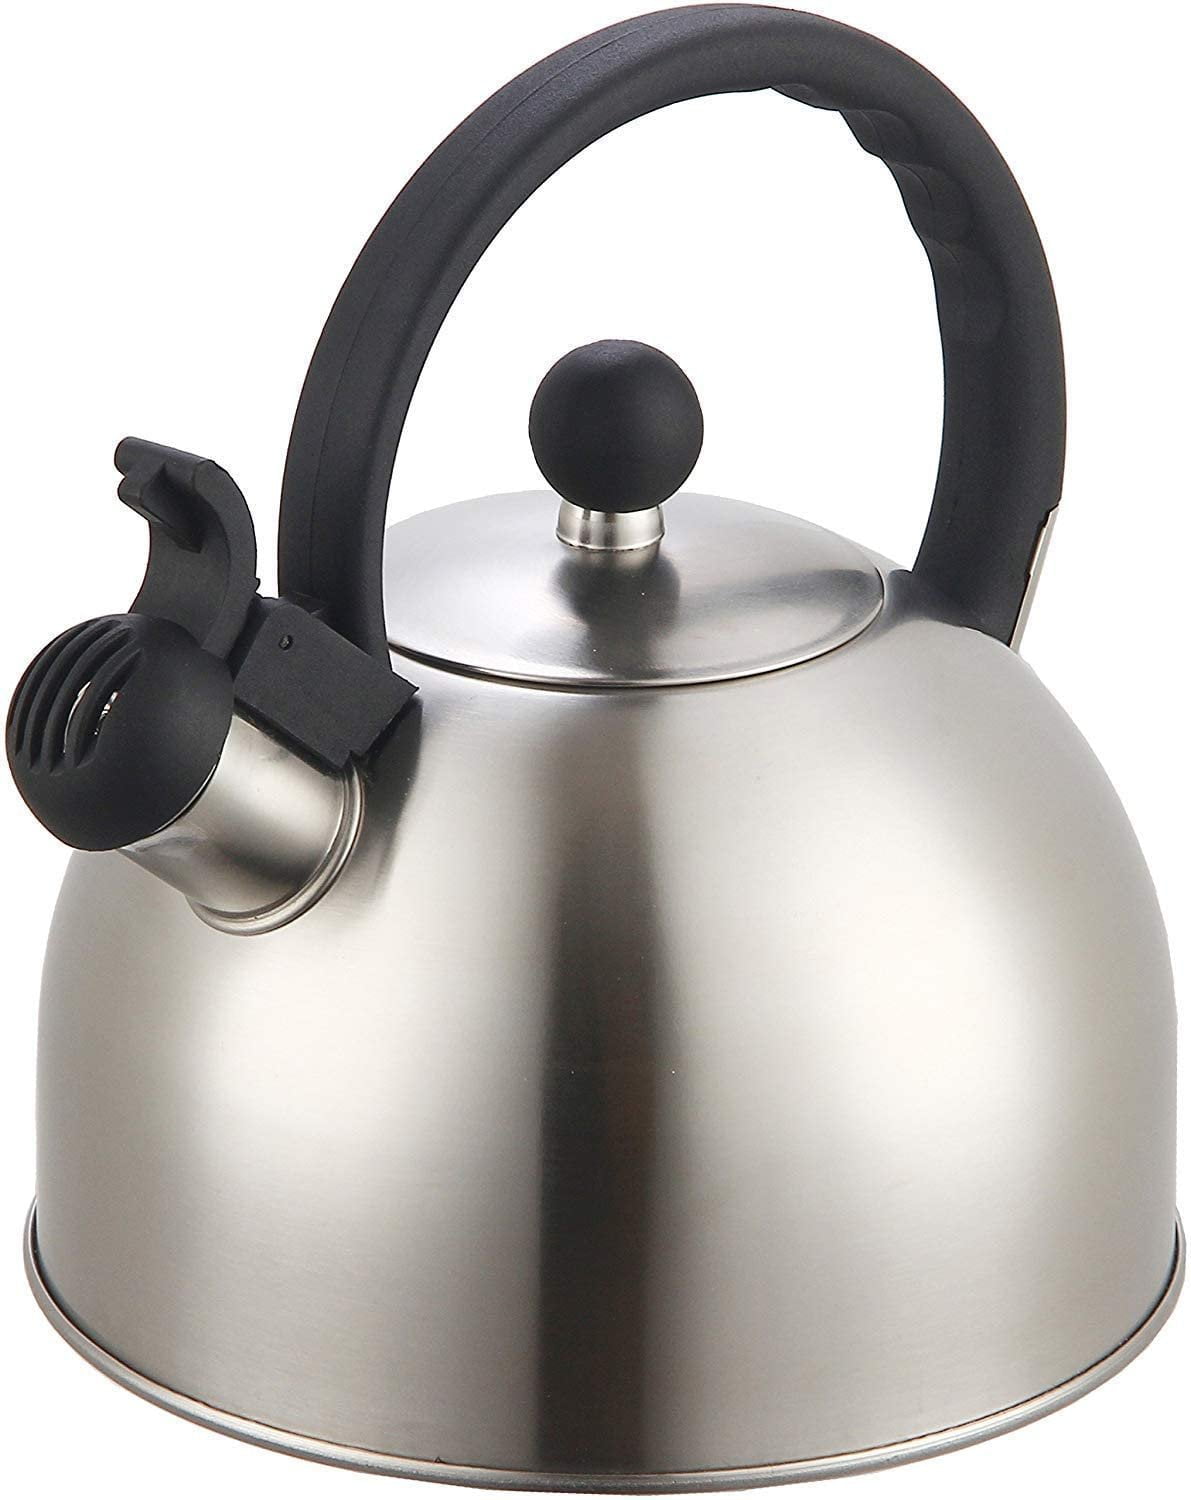 Dropship Whistling Kettle For Gas Stove Bouilloire 2l Stainless Steel  Whistle Teabottle, water Kettle to Sell Online at a Lower Price